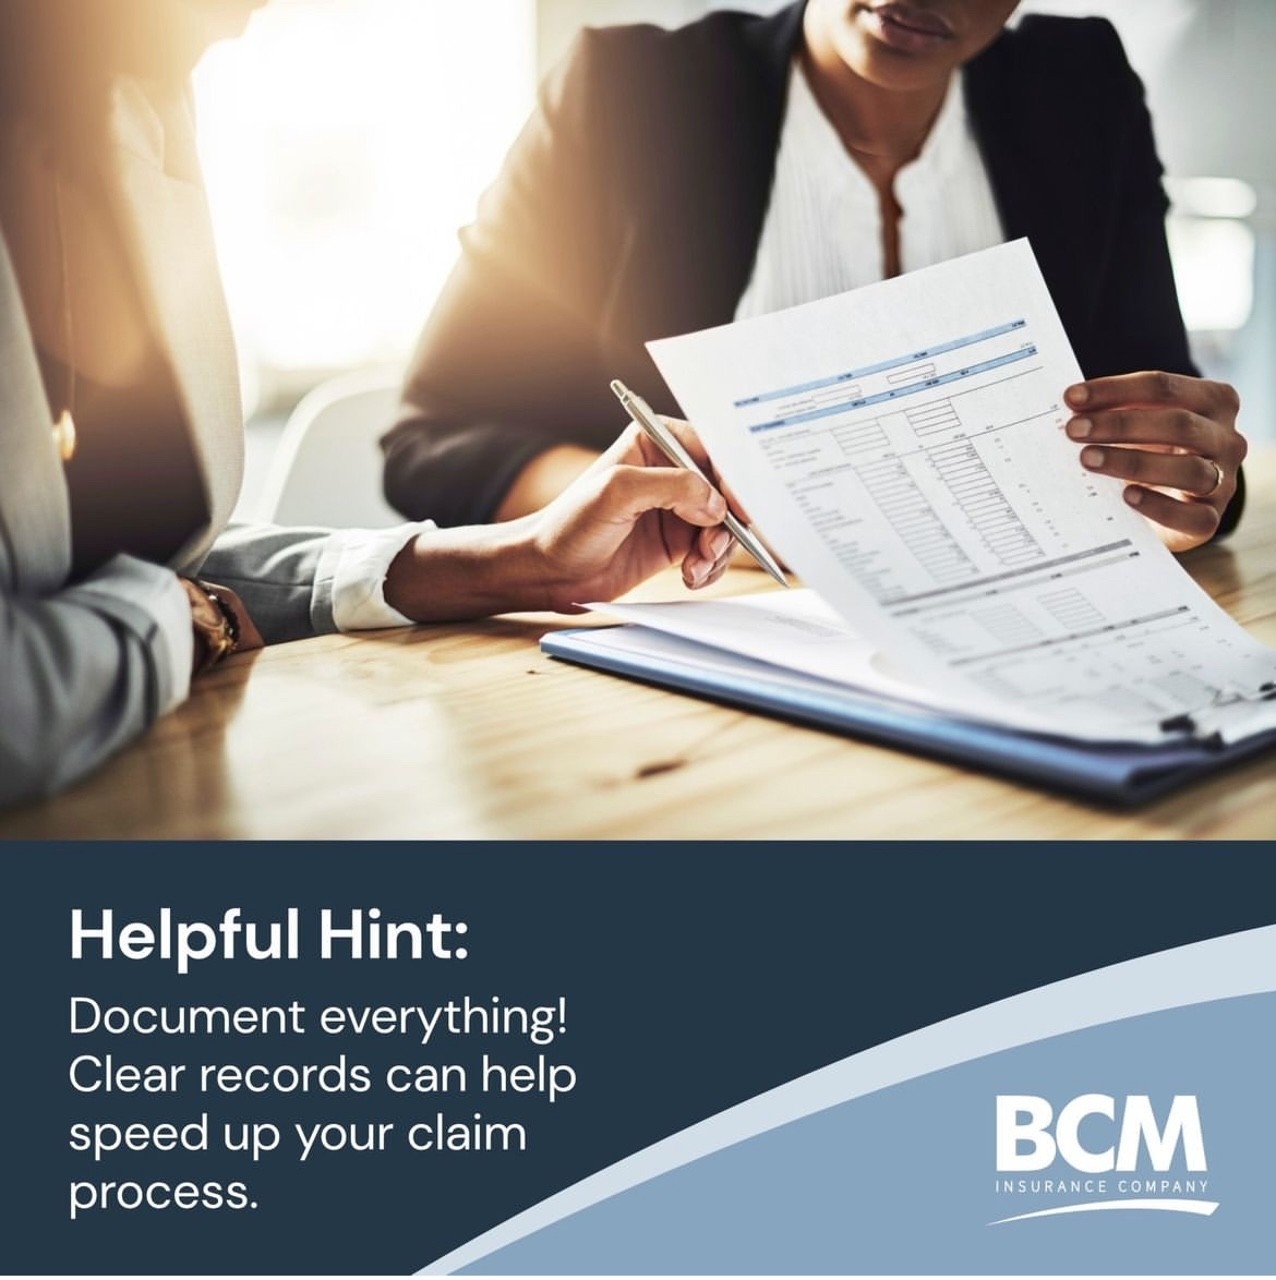 The Claims Process Explained: What to Expect When Filing an Insurance Claim